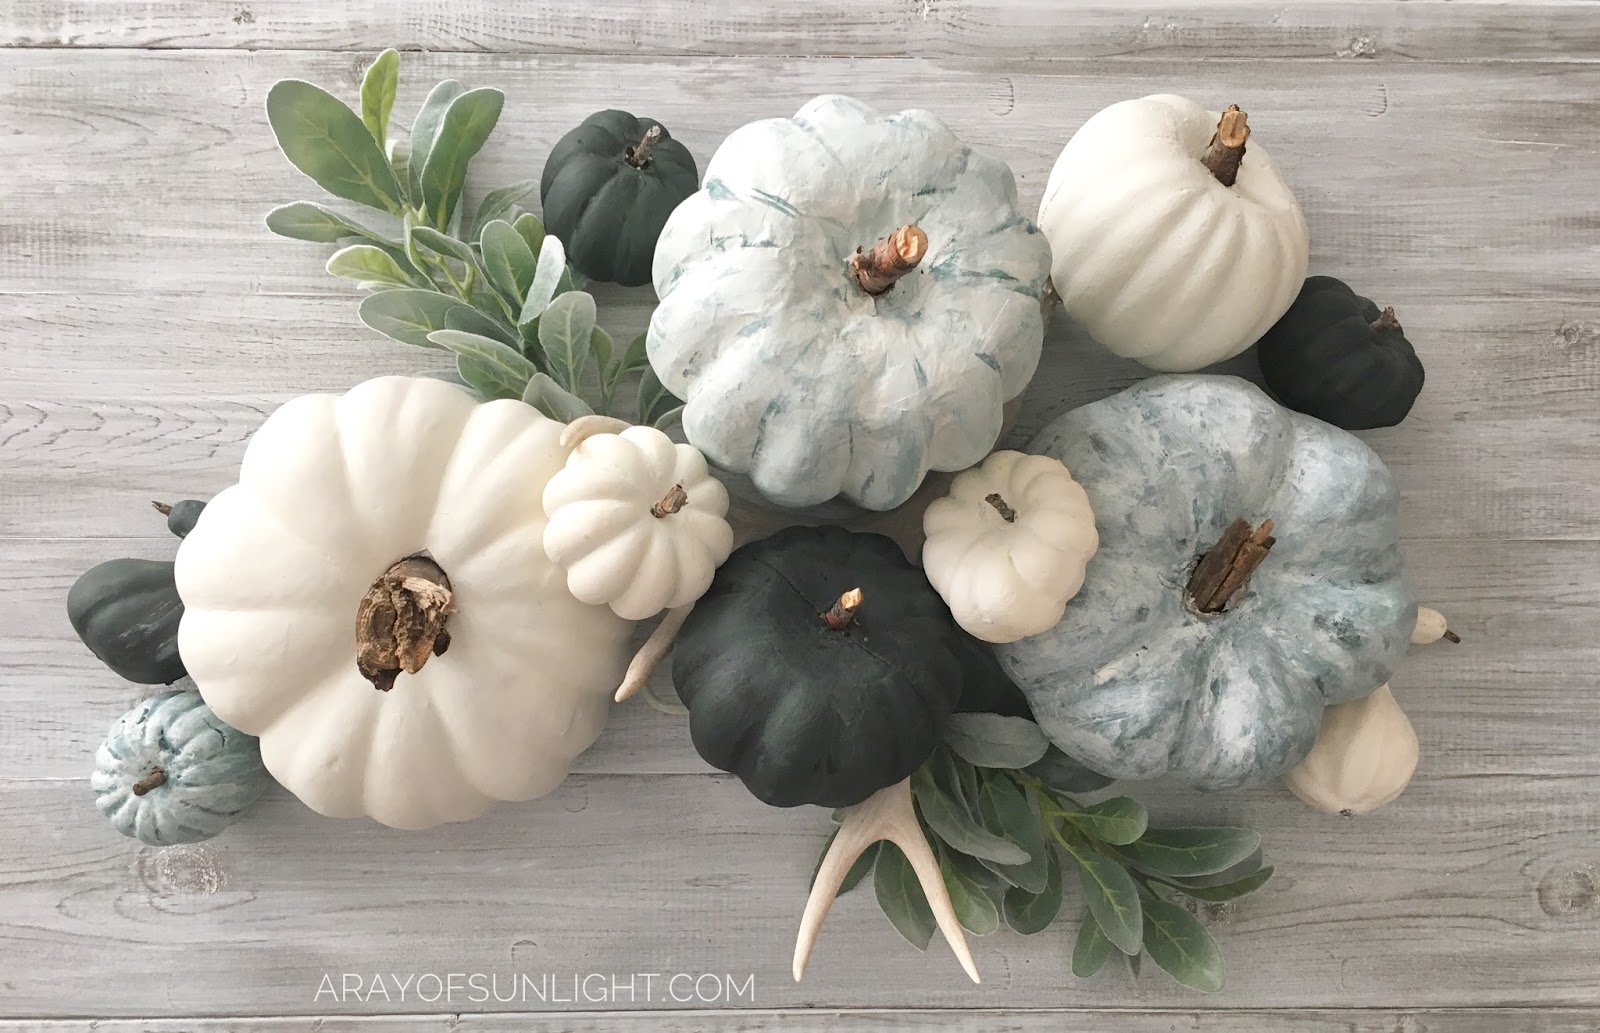 Learn how to make these painted fall pumpkins... the perfect project to get your fall decor going. We used Country Chic Paint to make these muted blue and green pumpkins and mixed them with lambs ear and antlers to go with our farmhouse decor. By A Ray of Sunlight